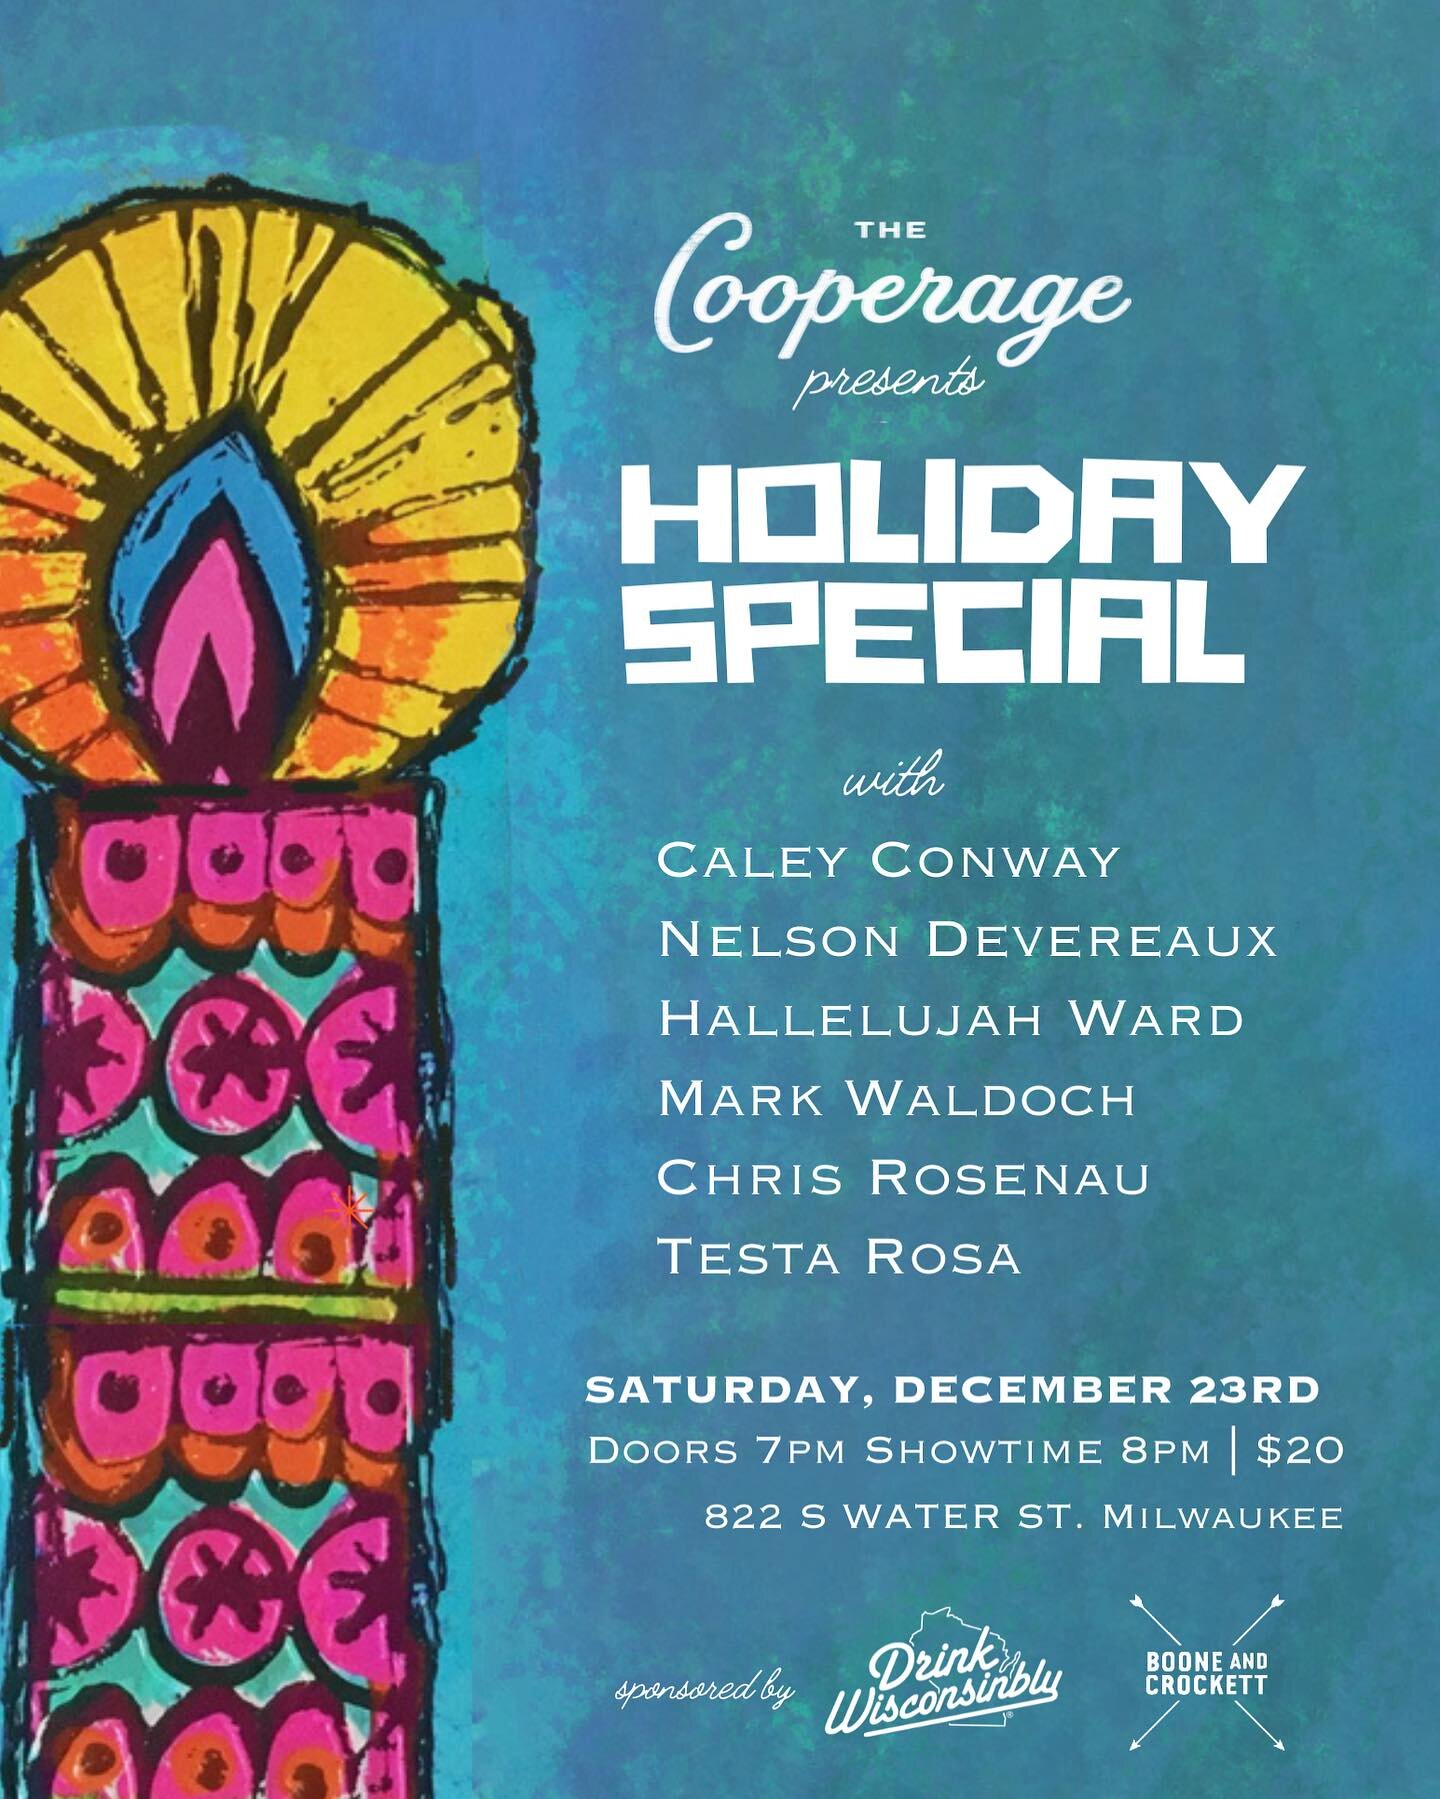 Hey everybody! If you&rsquo;ll be in Milwaukee, please make your plans to join us for this wonderful Holiday Special at @cooperagemke on 12/23. I&rsquo;ll be performing my own arrangements of some holiday classics alongside these cherished Milwaukee 